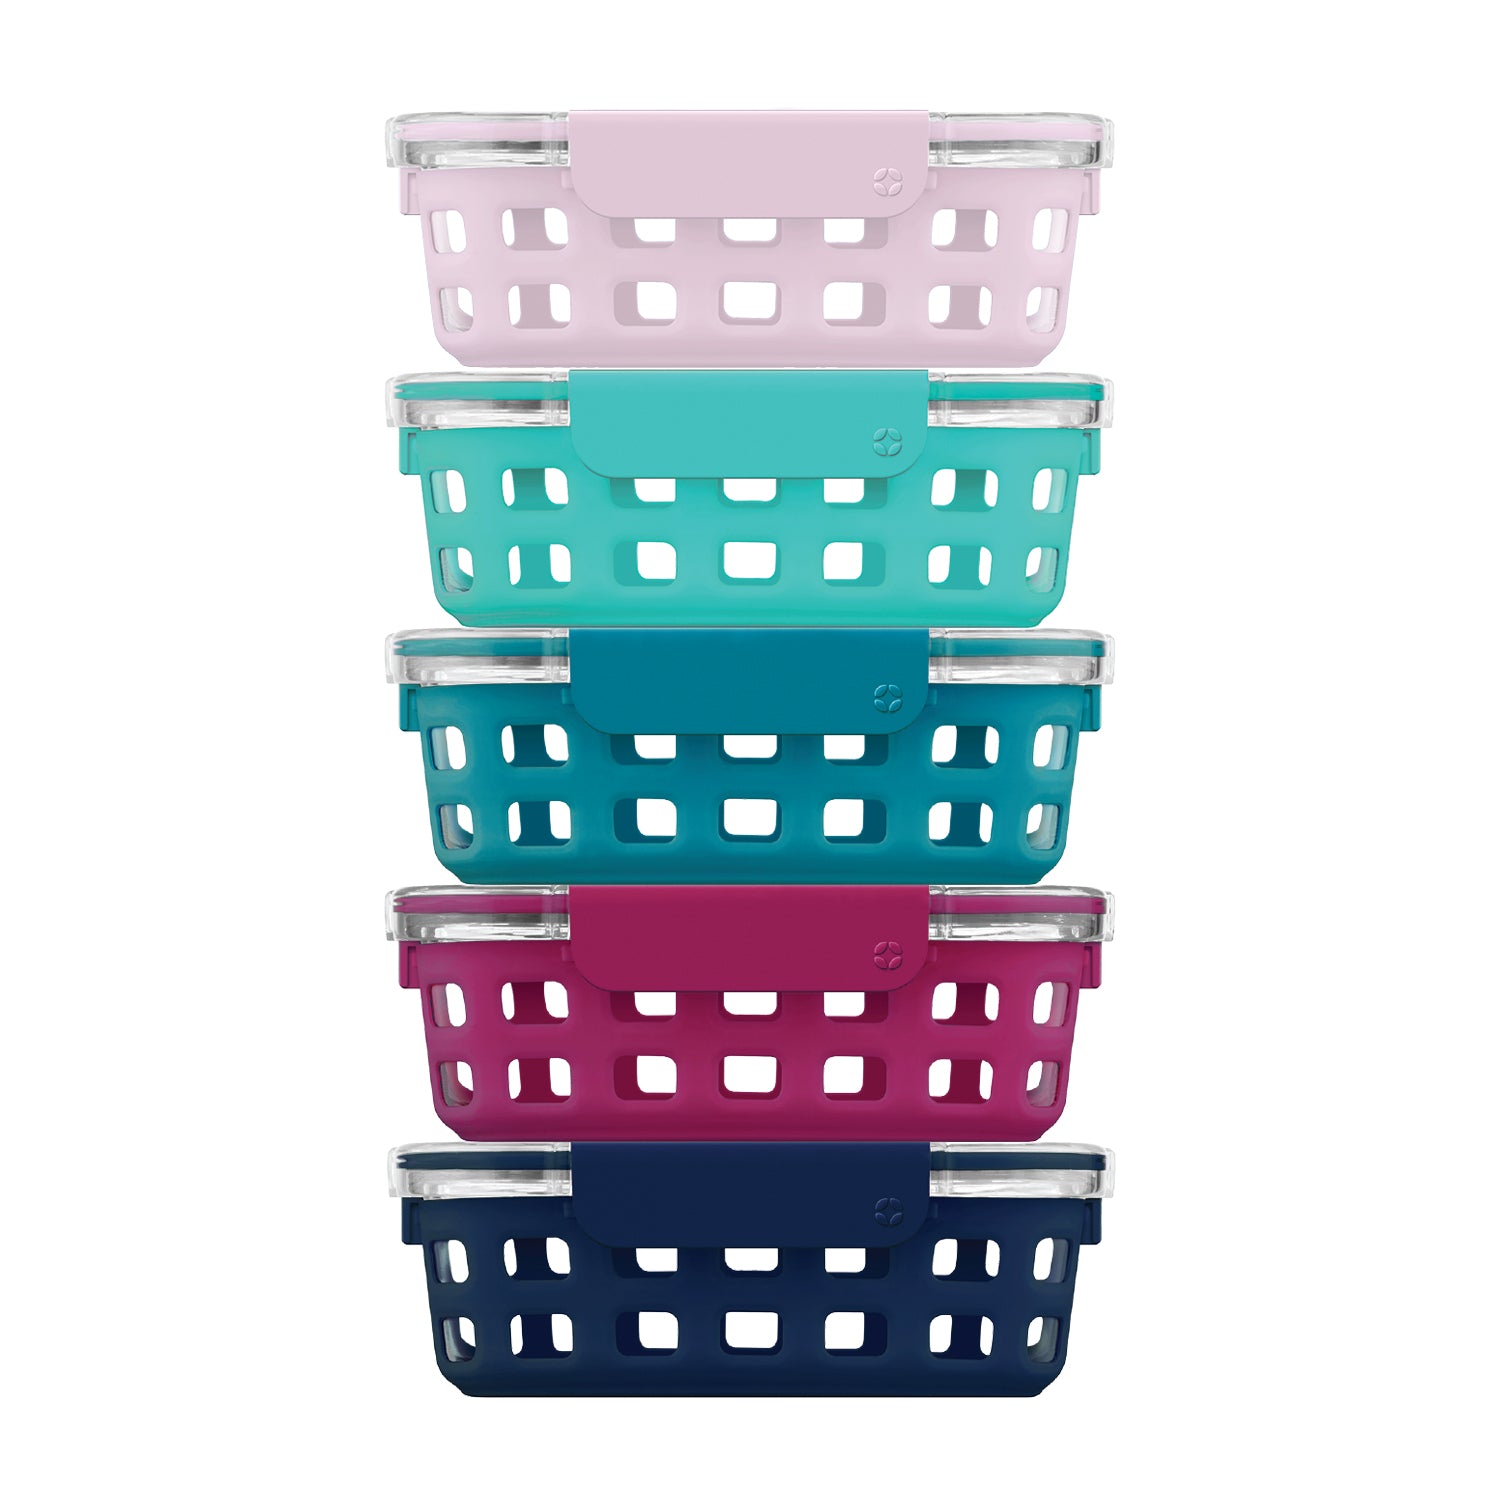 Ello Refresh 5 Cup Glass Food Storage Container Blue : Target